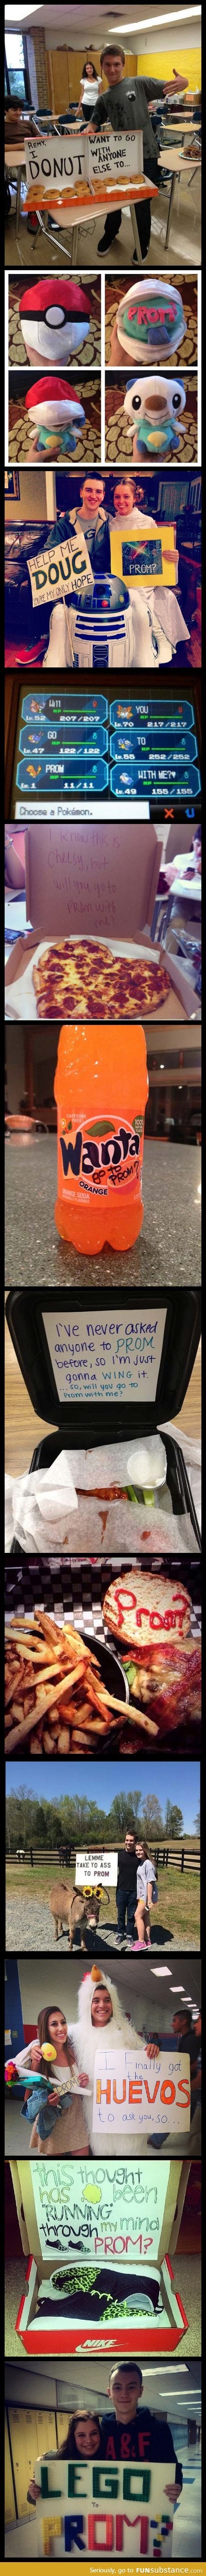 Would you like to go to the prom with me?